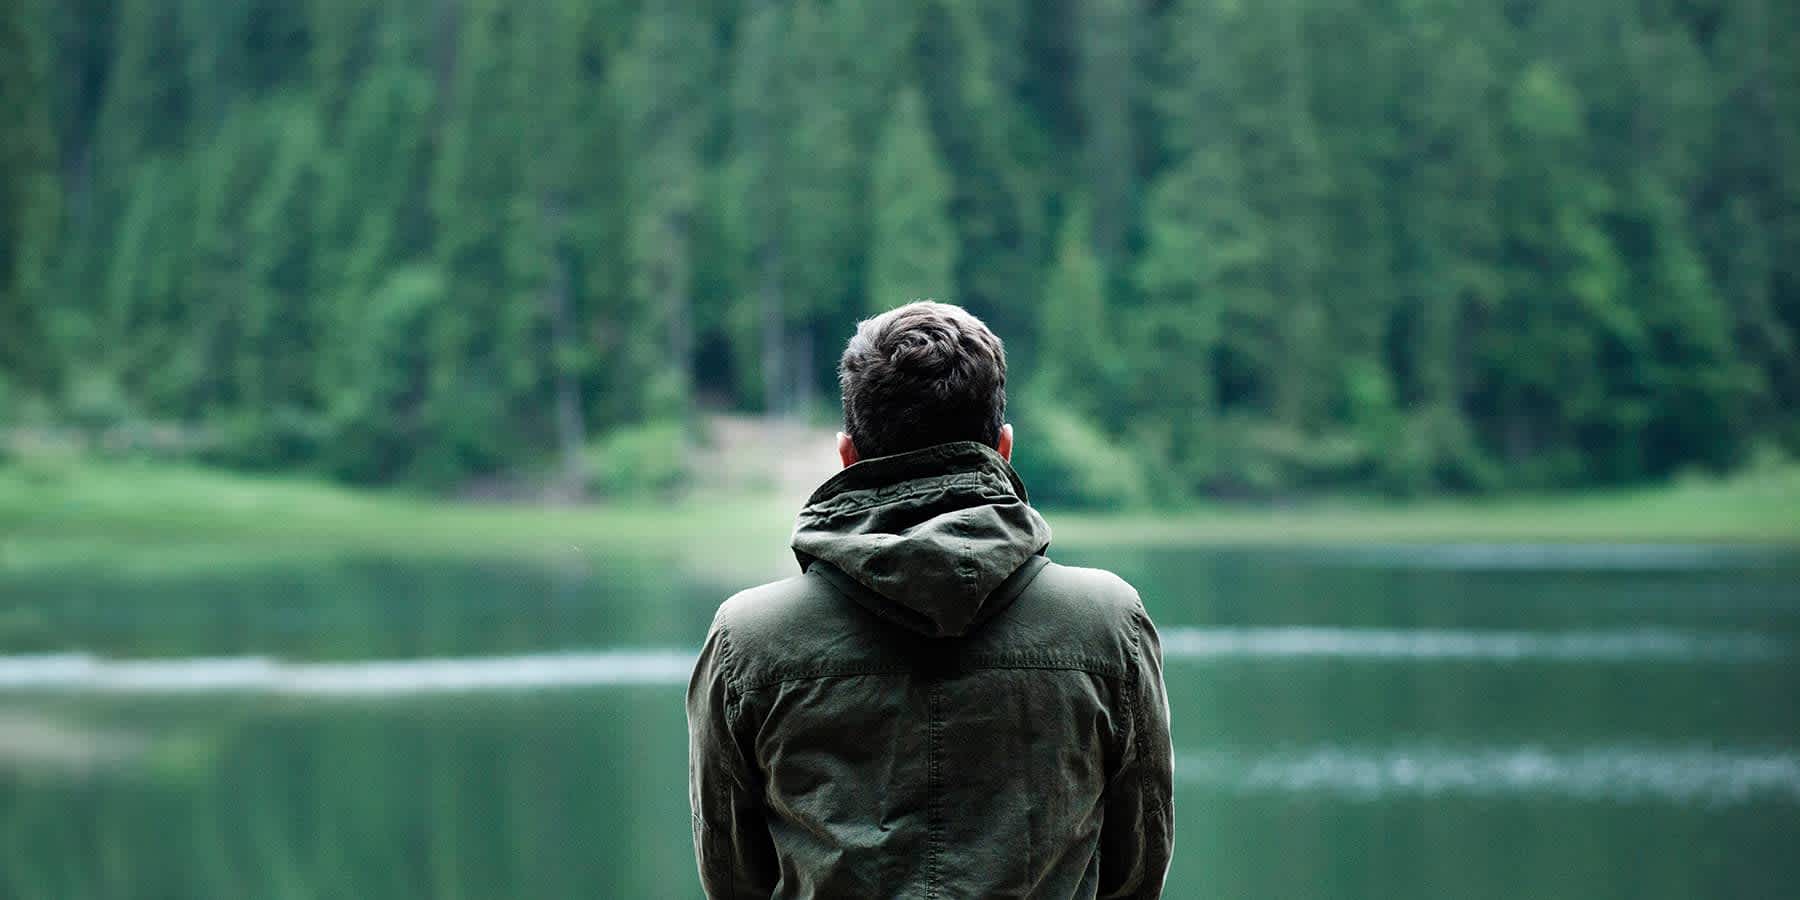 Man in jacket experiencing mood change while looking across lake and forest